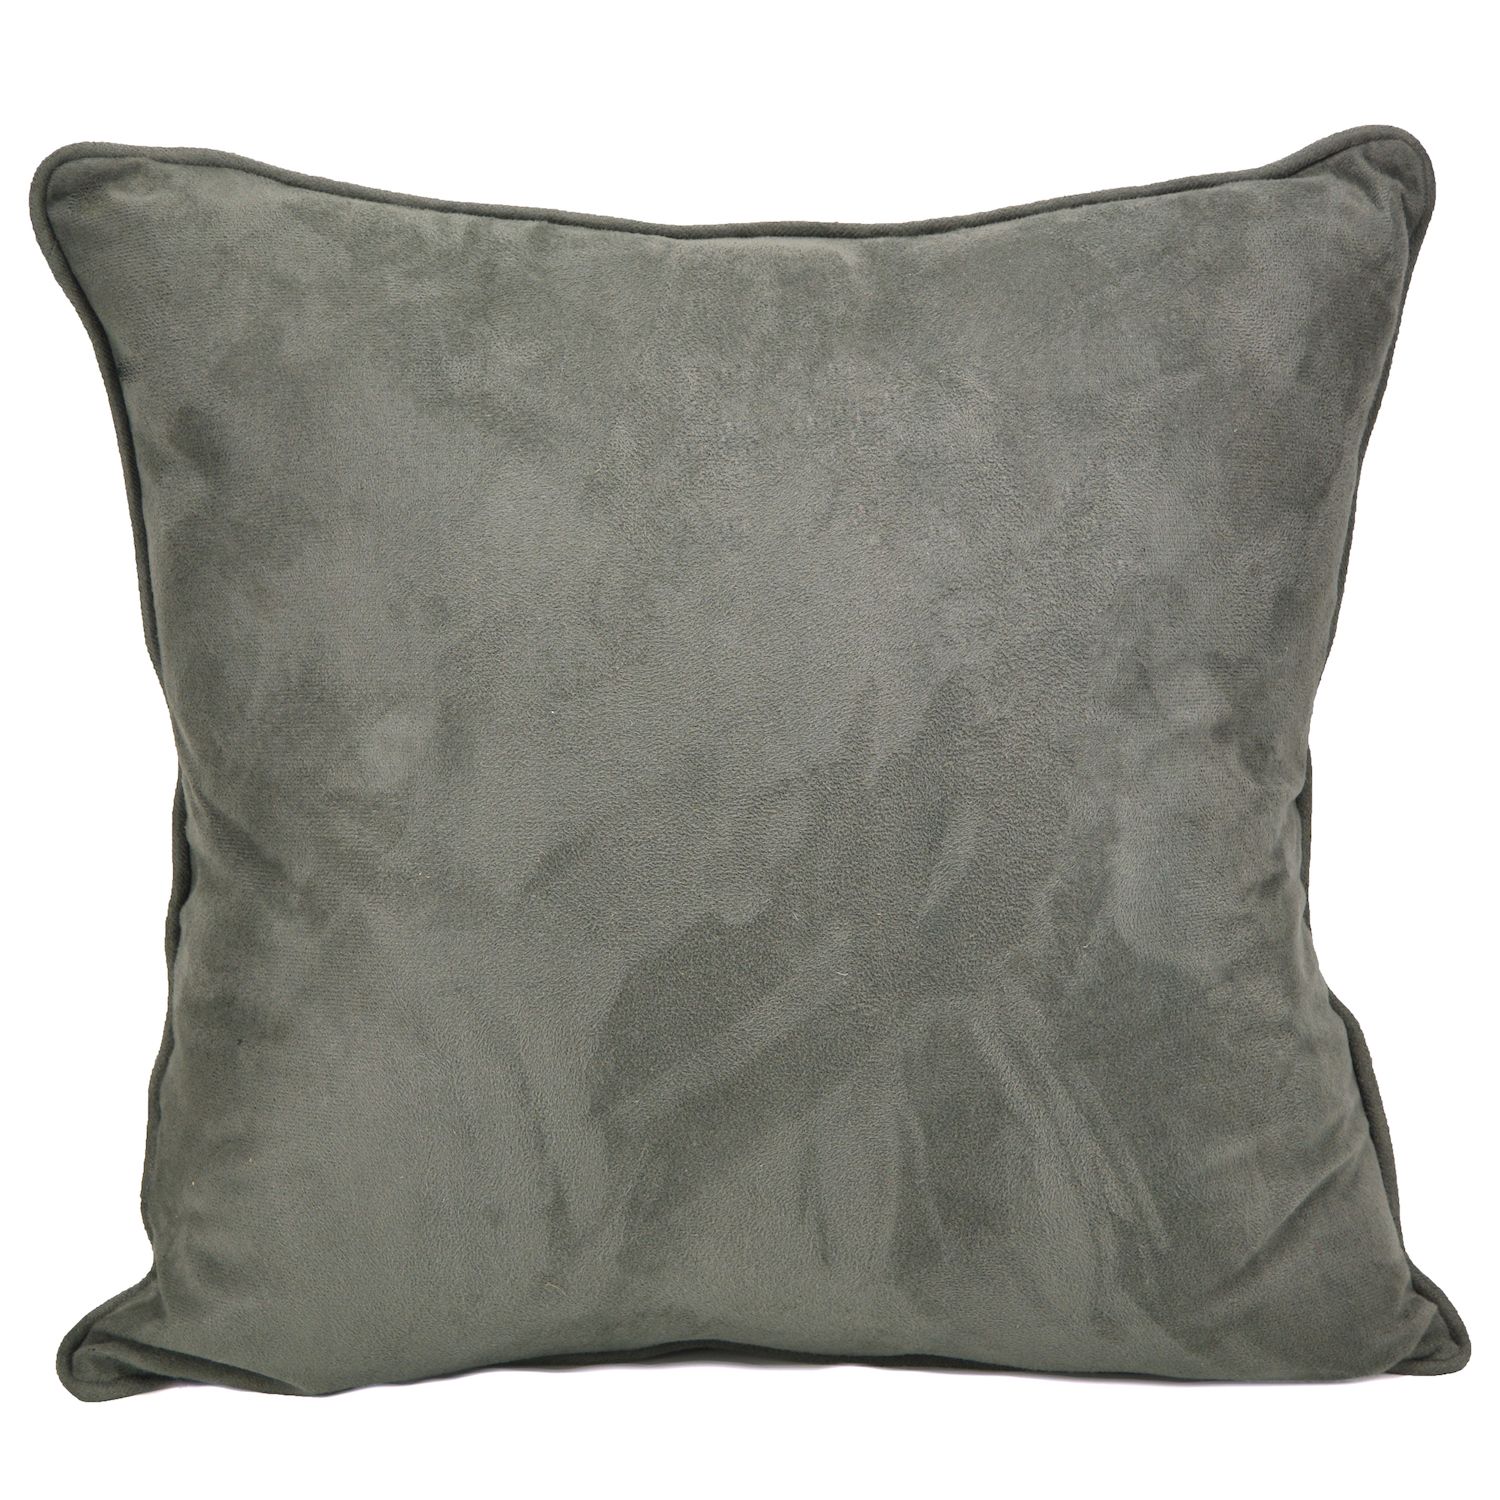 Image for Donna Sharp Canoe Trip Gray Decorative Pillow at Kohl's.